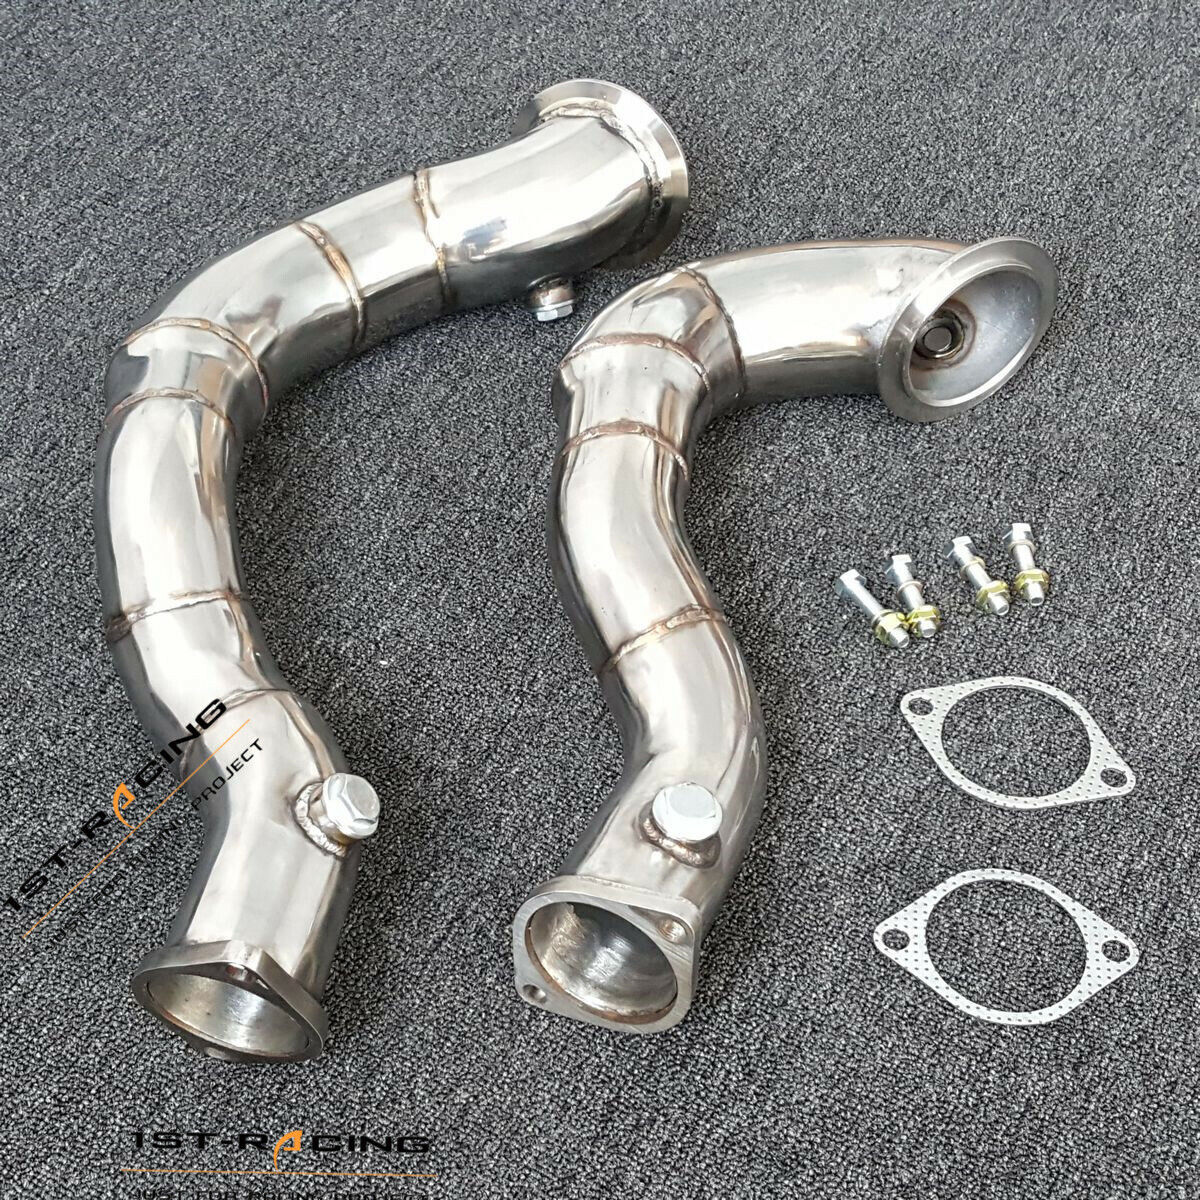 2PCS 3″ Stainless Steel Downpipes For 07-11 BMW N54 335xi 3.0L Twin Turbos New